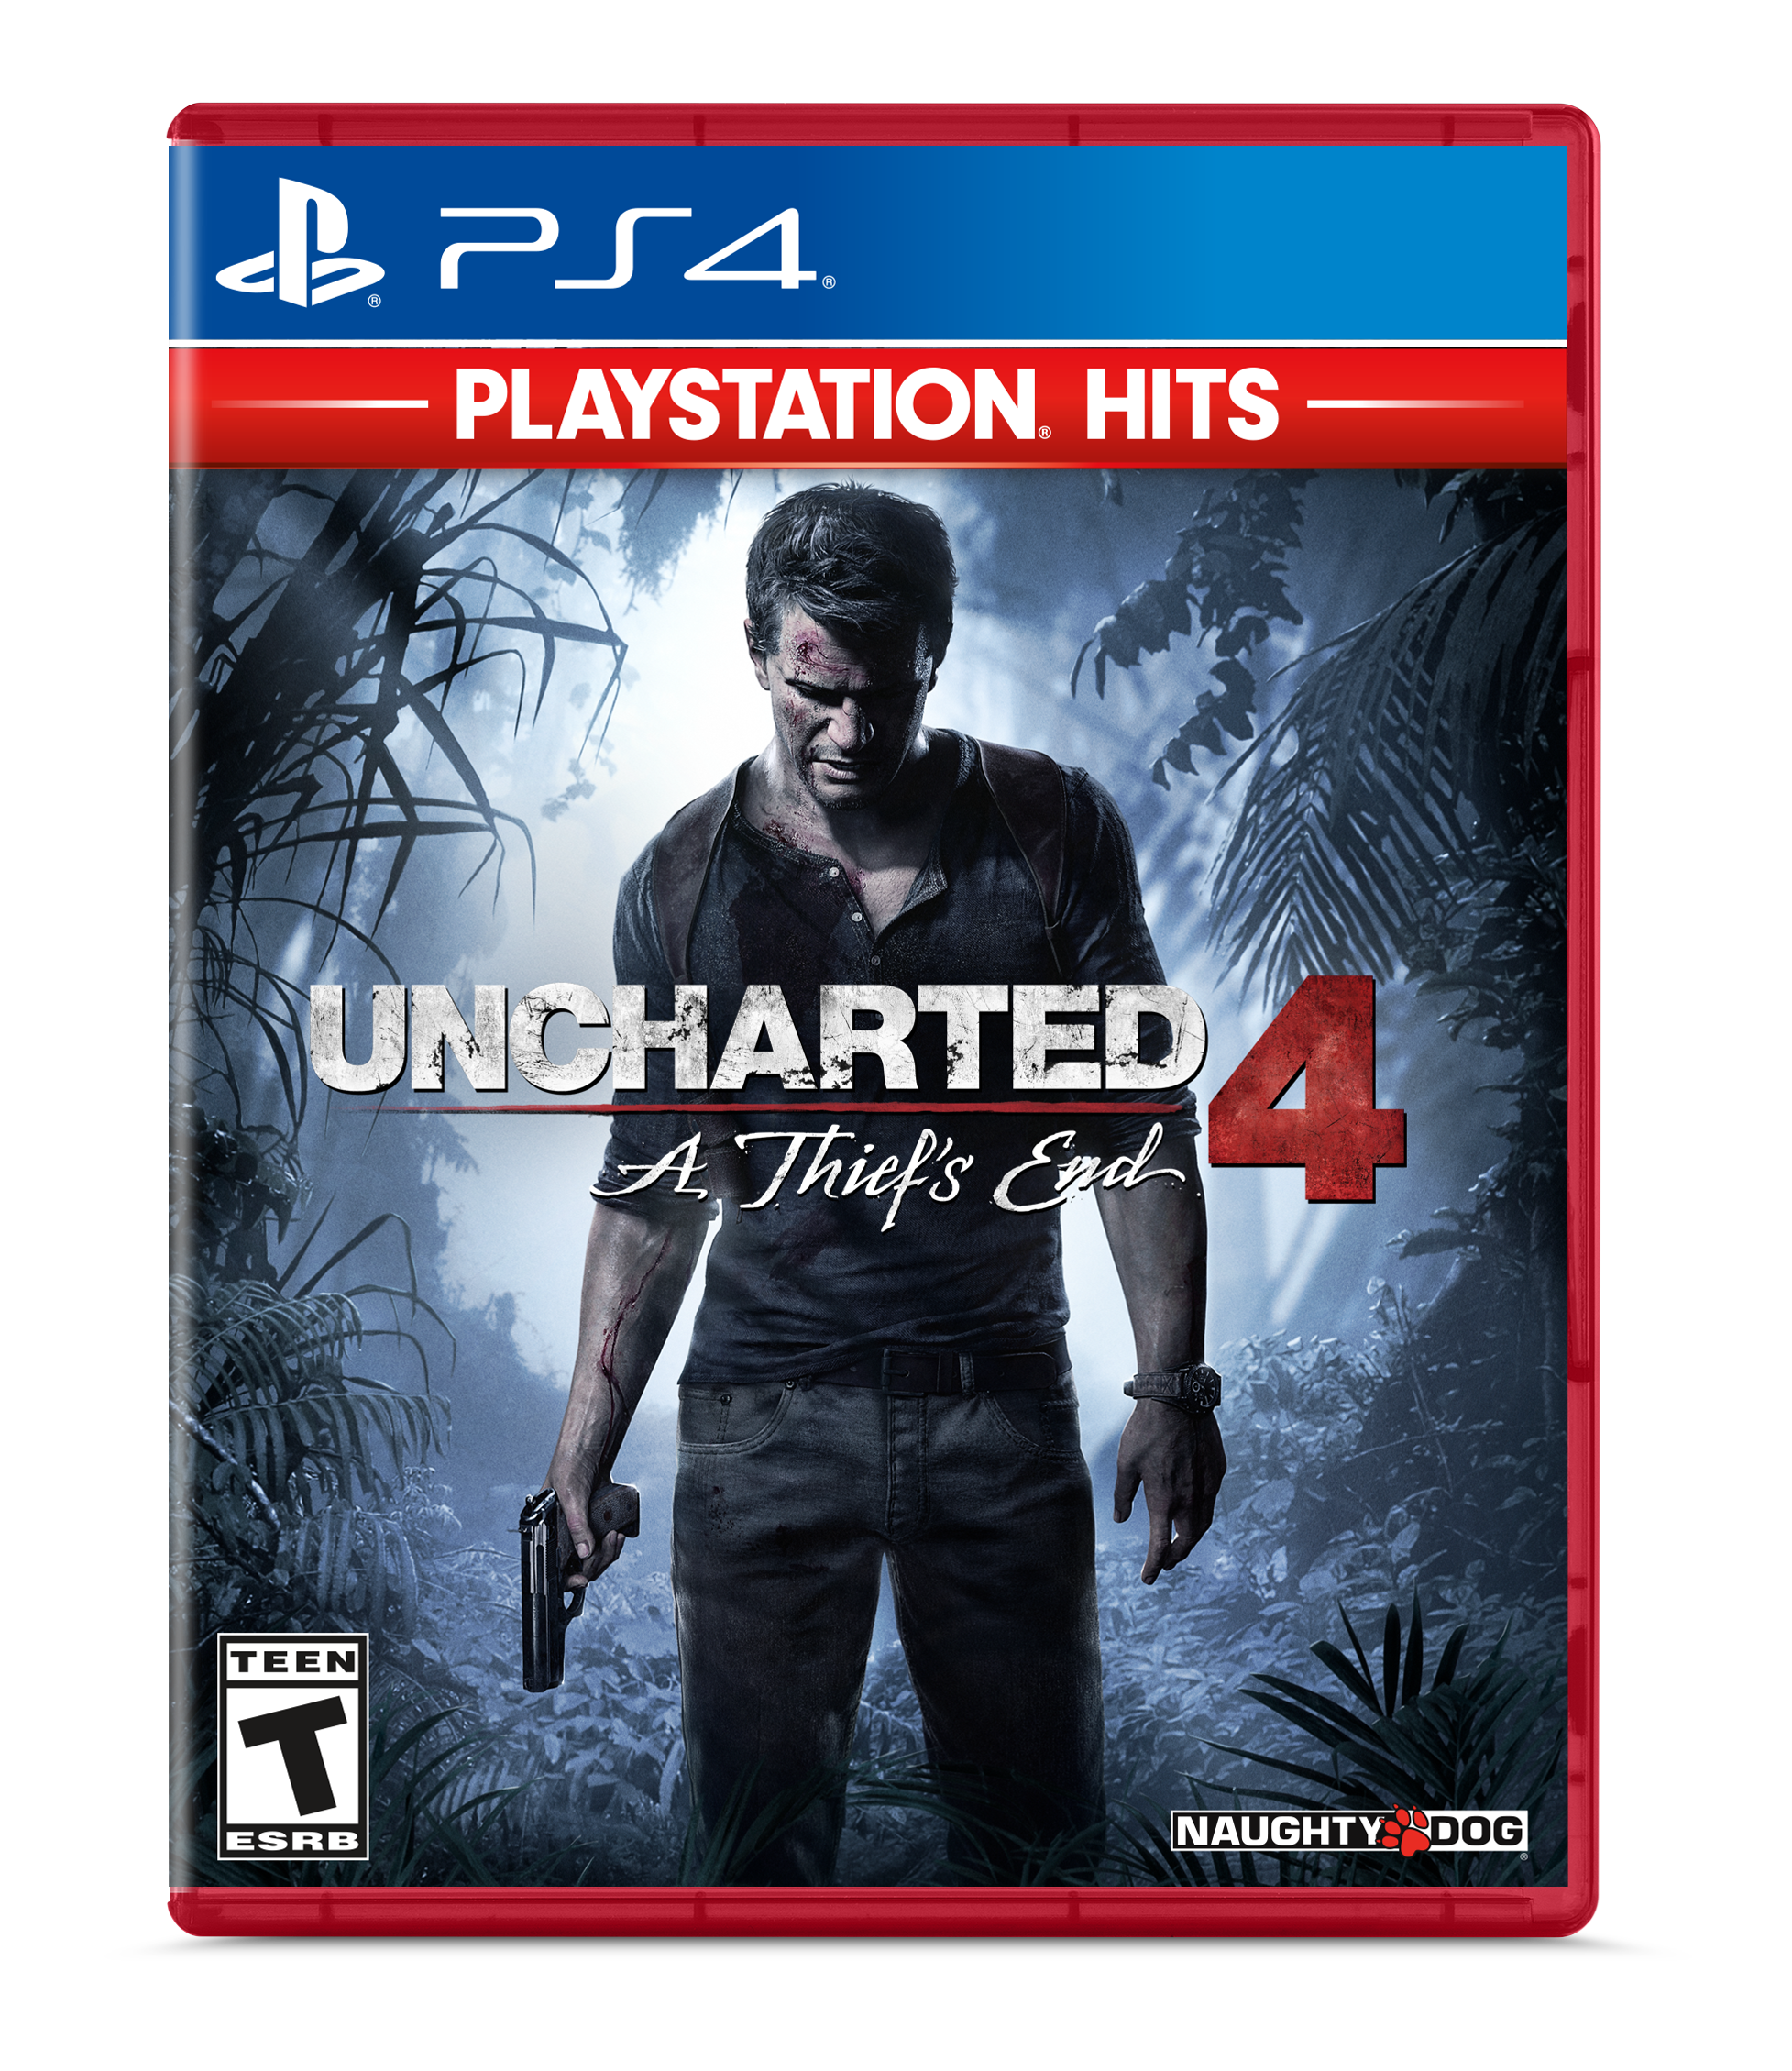 Uncharted 4: A Thief's End - PlayStation Hits, Sony, PlayStation 4, 711719523215 - image 1 of 2